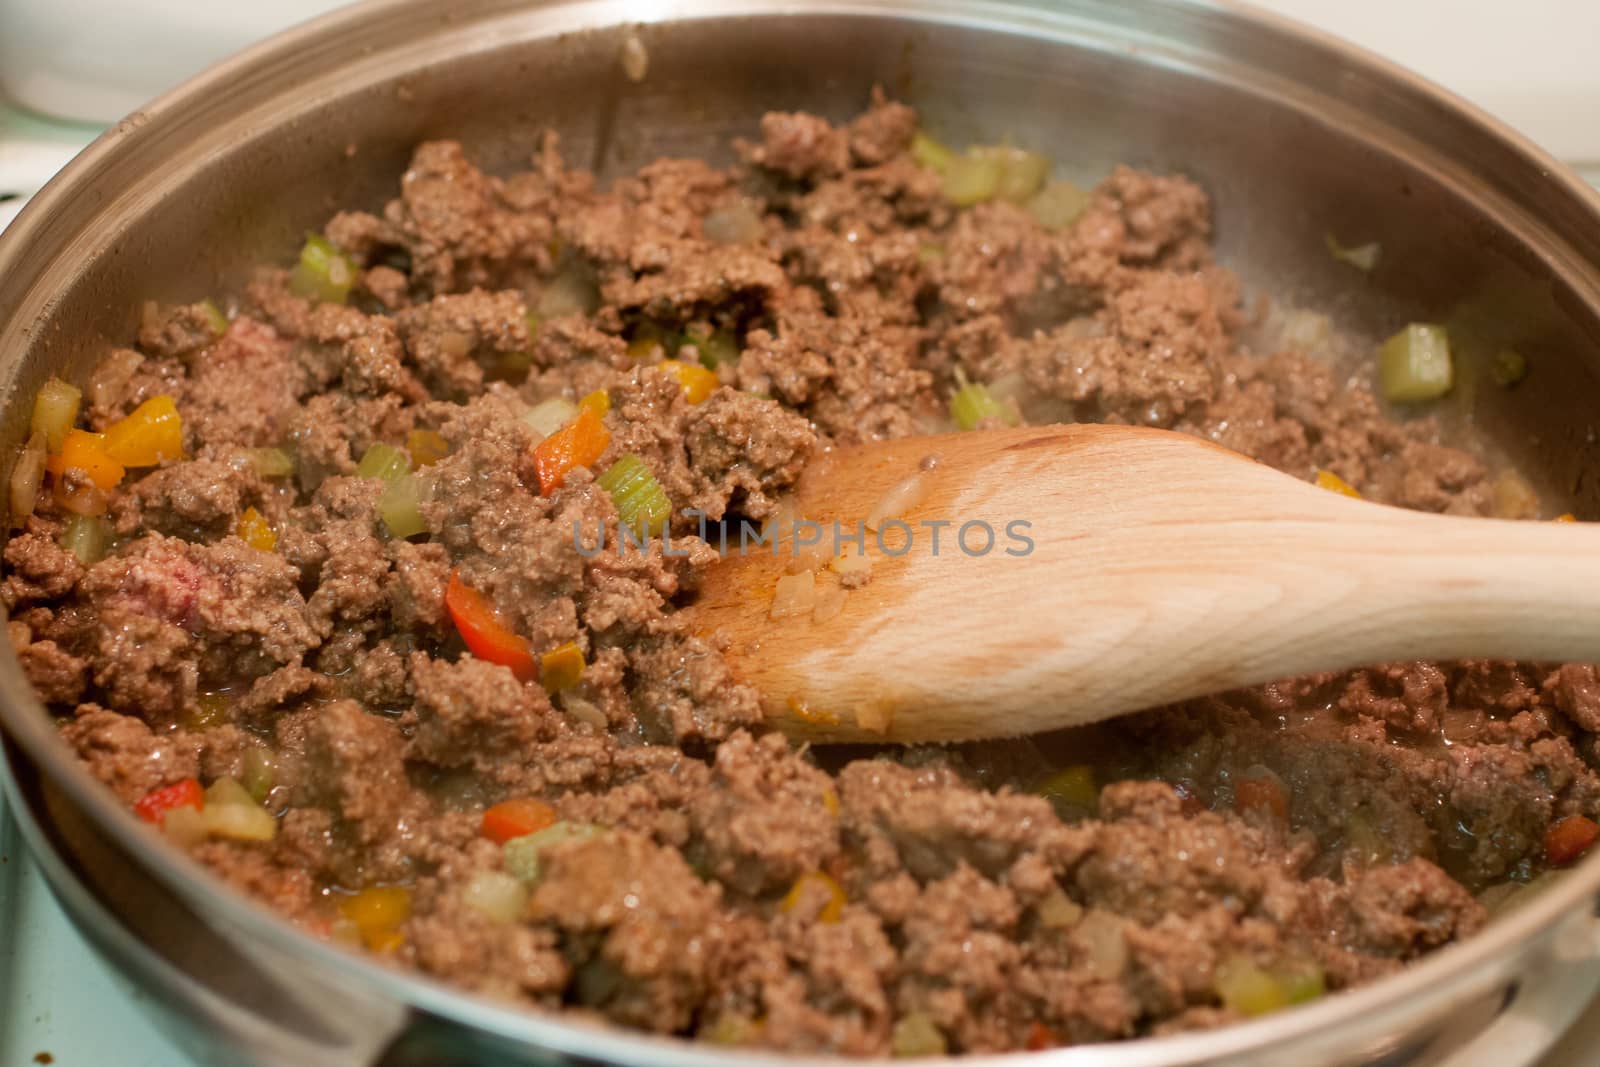 Fresh ground beef and vegetables cooking in a skillet with a wooden spoon stirring it.